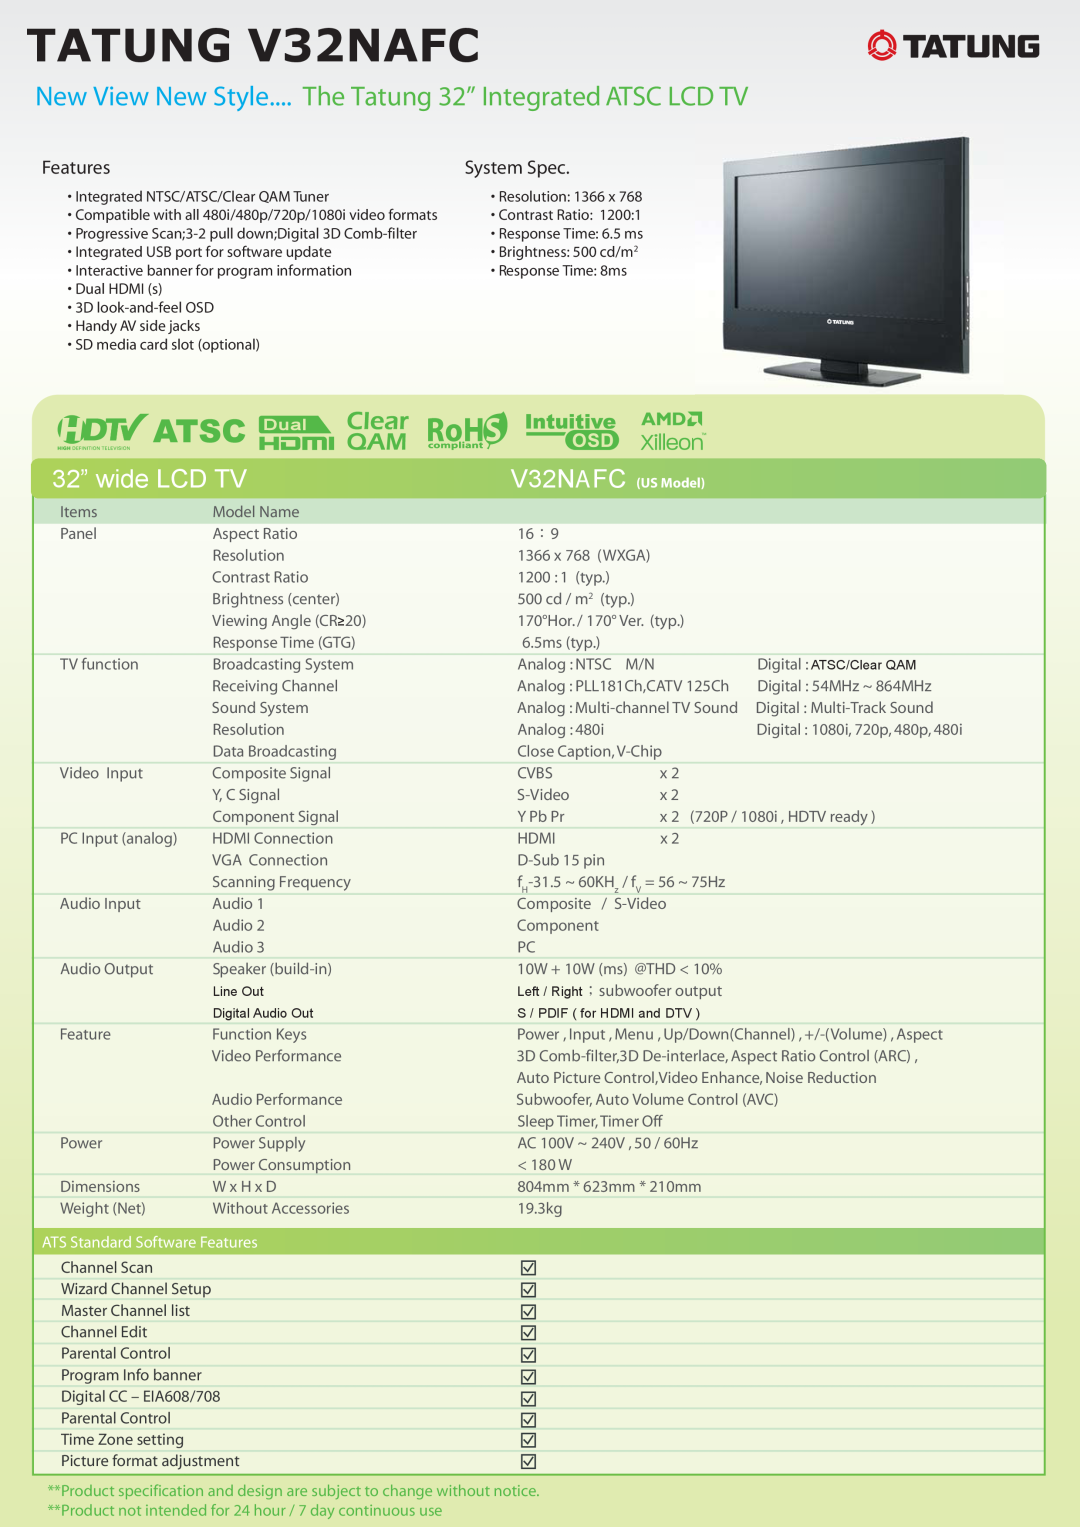 Tatung manual TATUNG V32NAFC, New View New Style.... The Tatung 32” Integrated ATSC LCD TV, 32” wide LCD TV, Features 